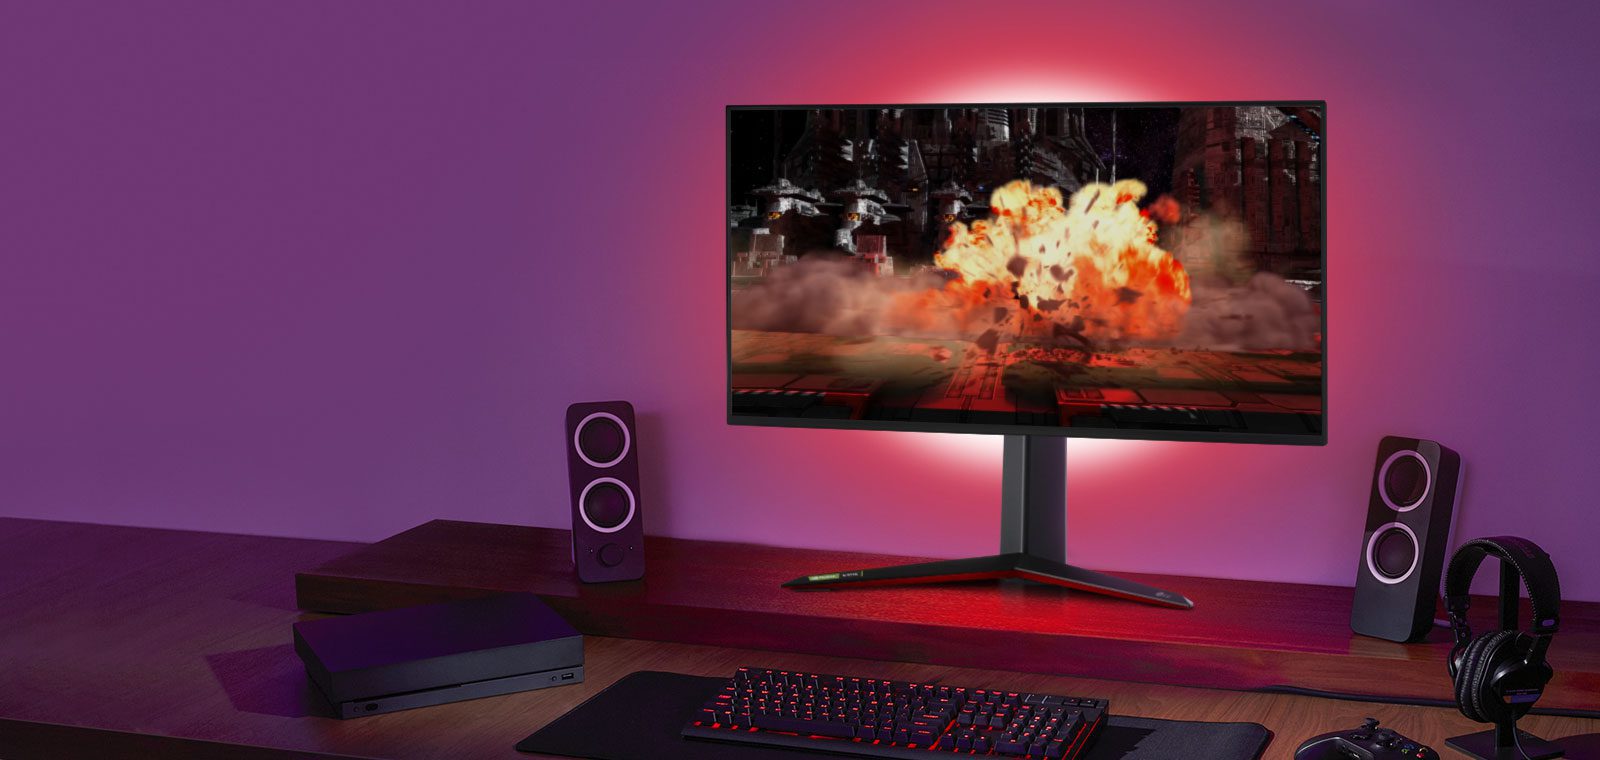 LG UltraGear 27GN950 B Gaming Monitor Features 5 1